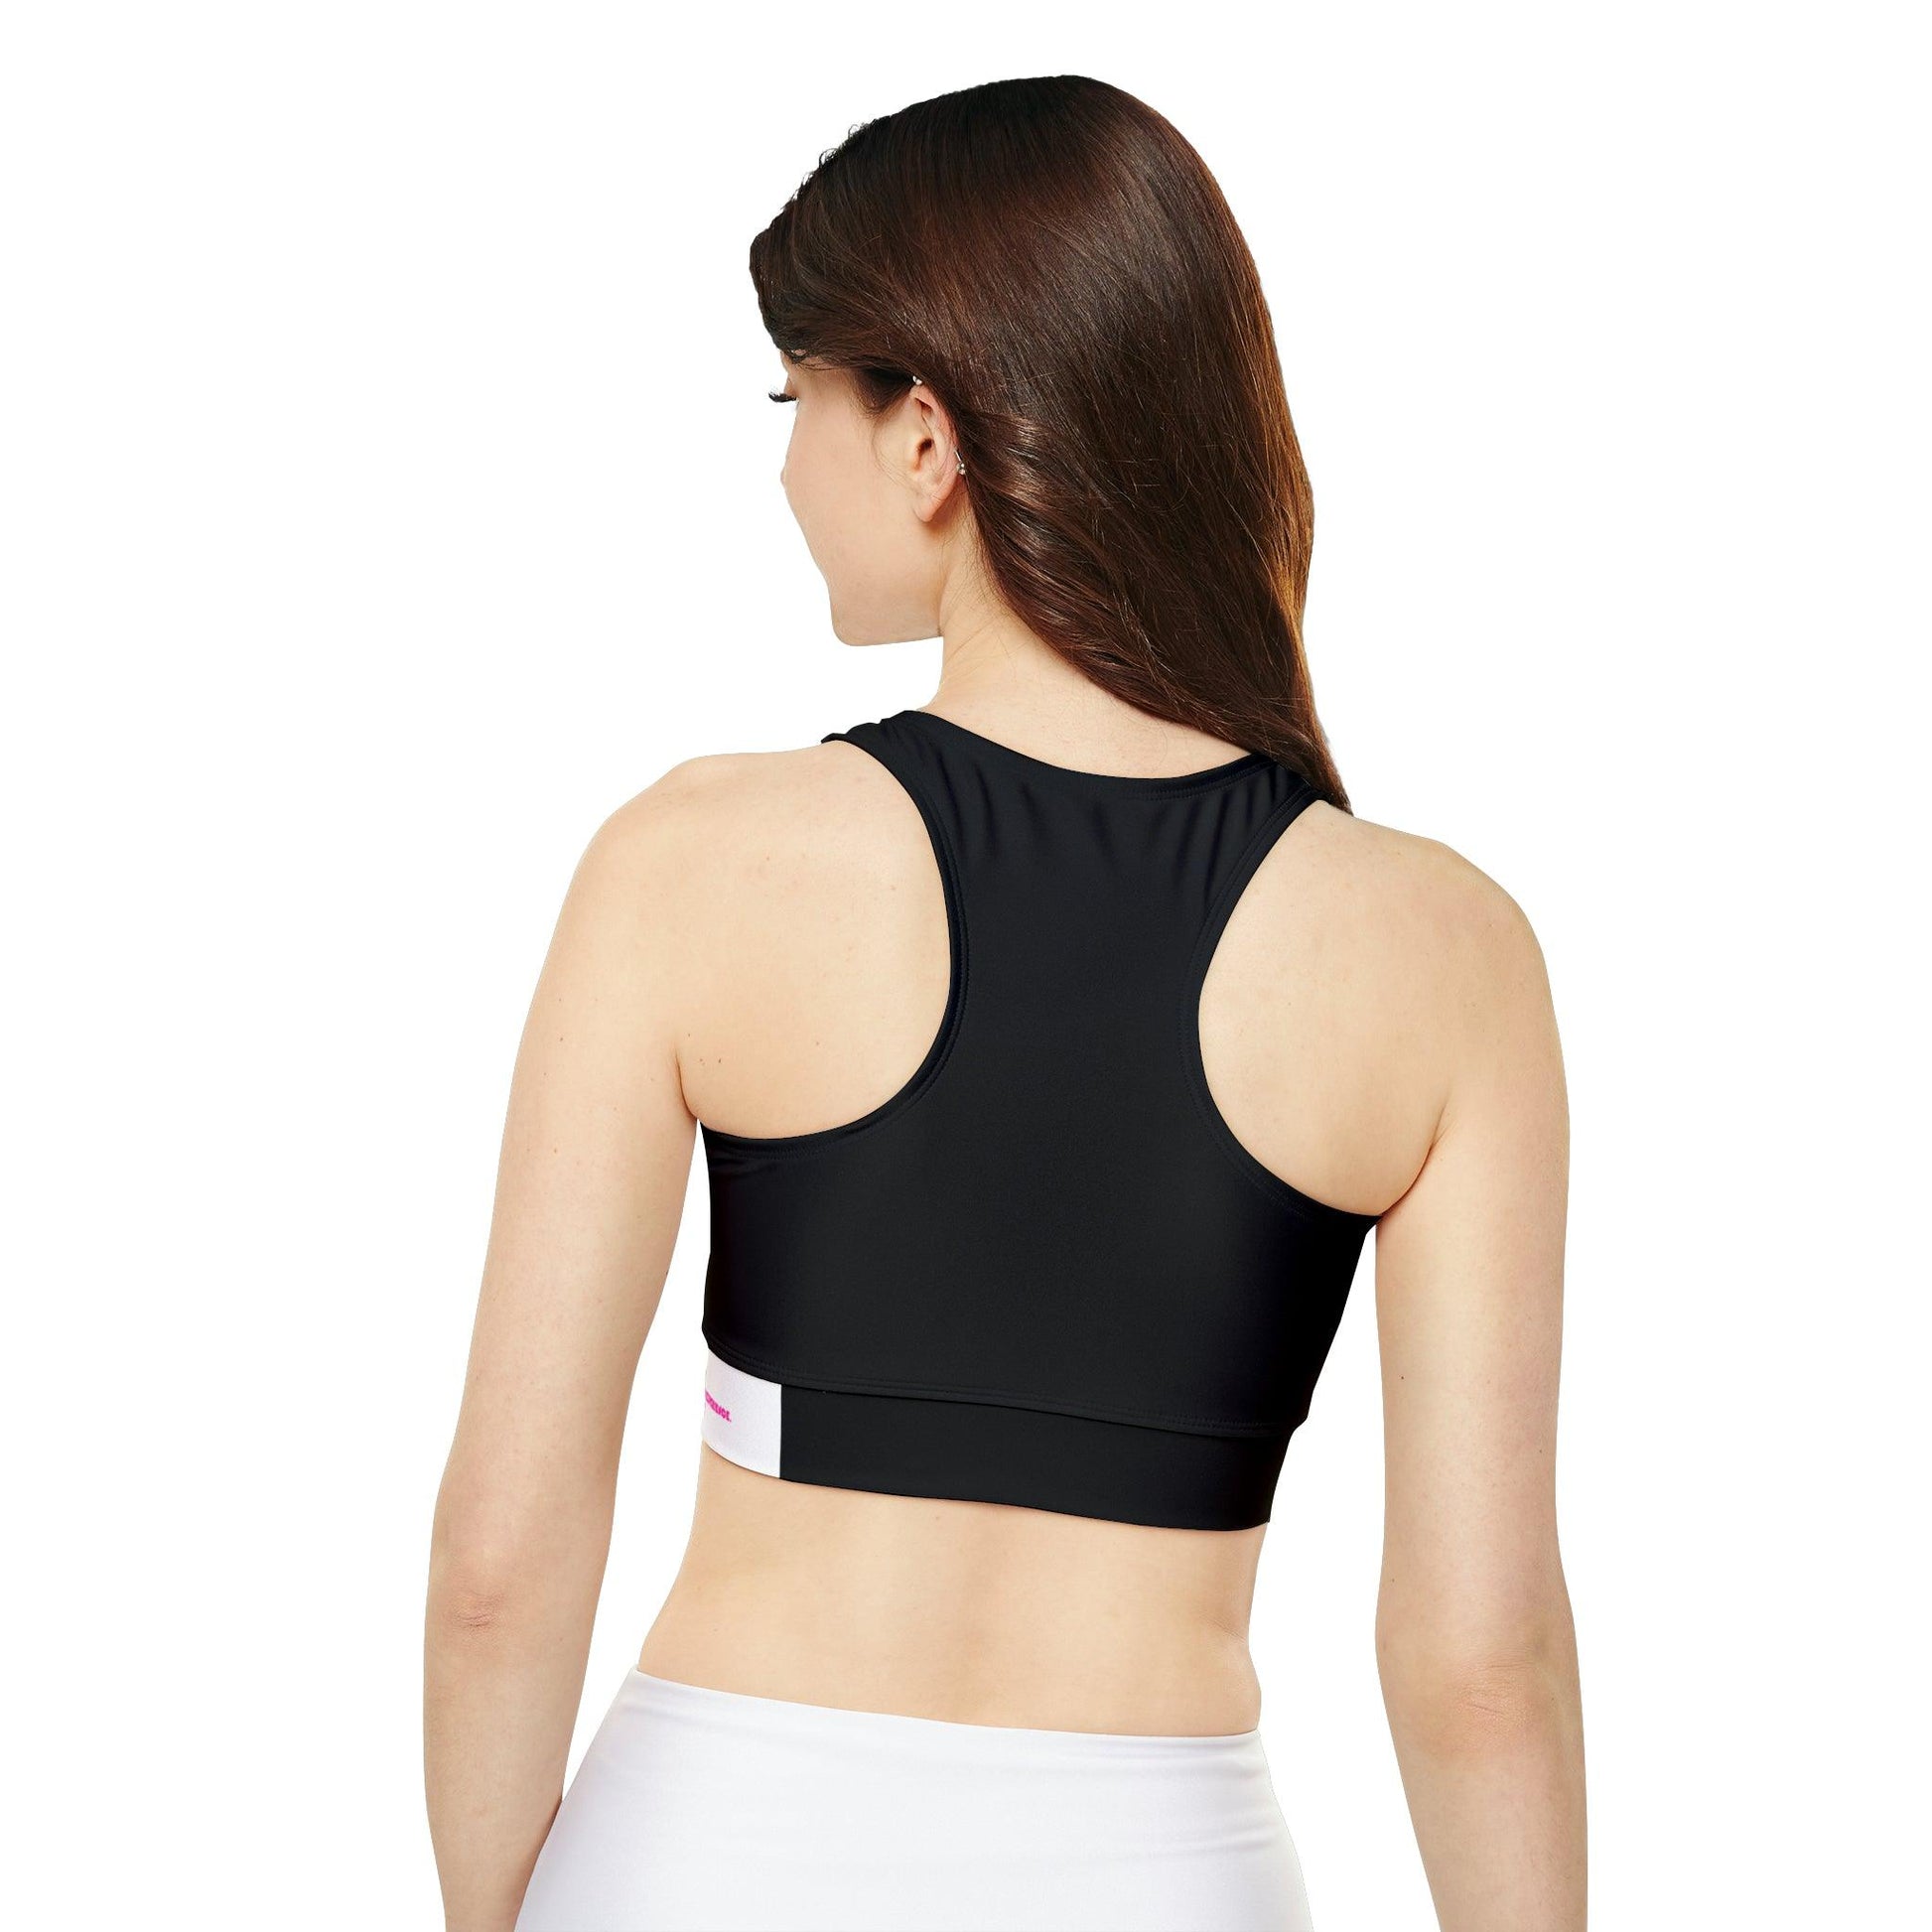 Fully Lined, Black Padded Sports Bra - COFFEEBRE